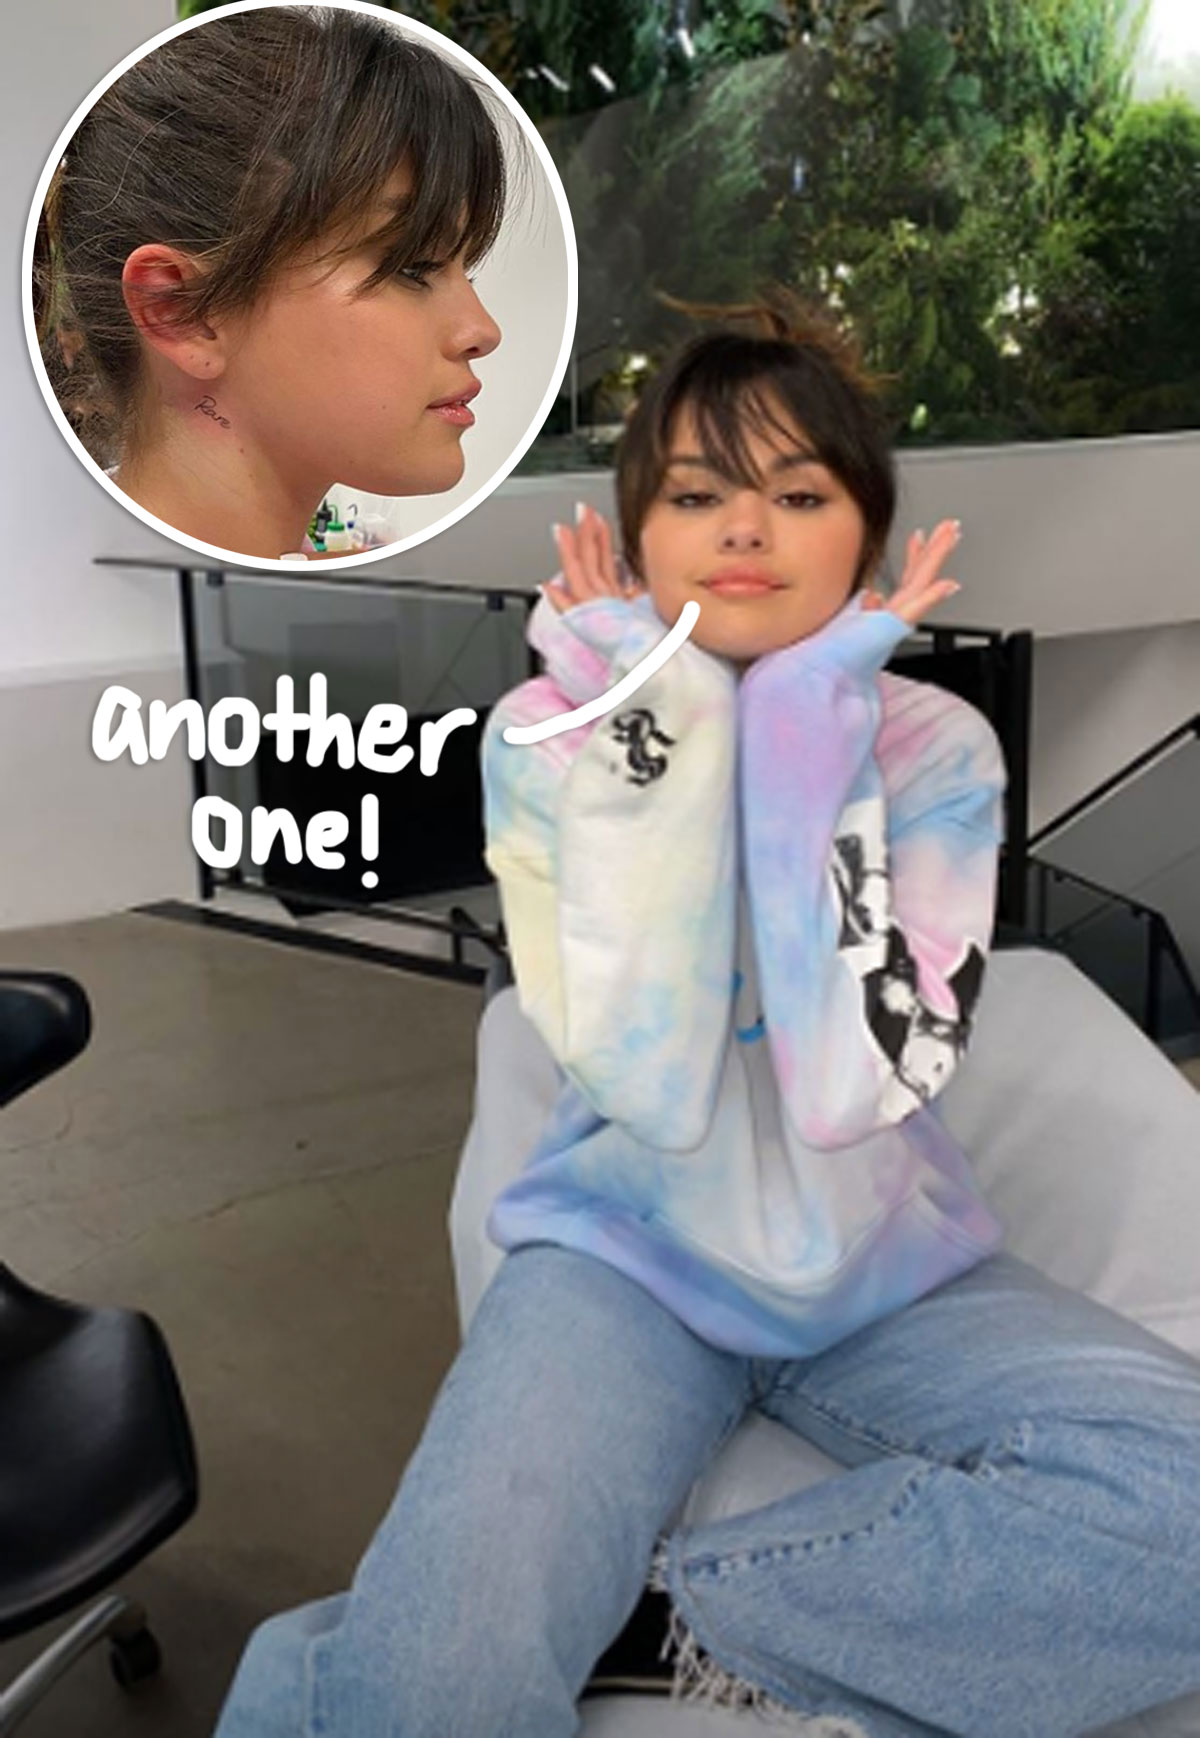 Selena Gomez gets ANOTHER new tattoo as she unveils painful-looking Rare  inking on her neck | Daily Mail Online